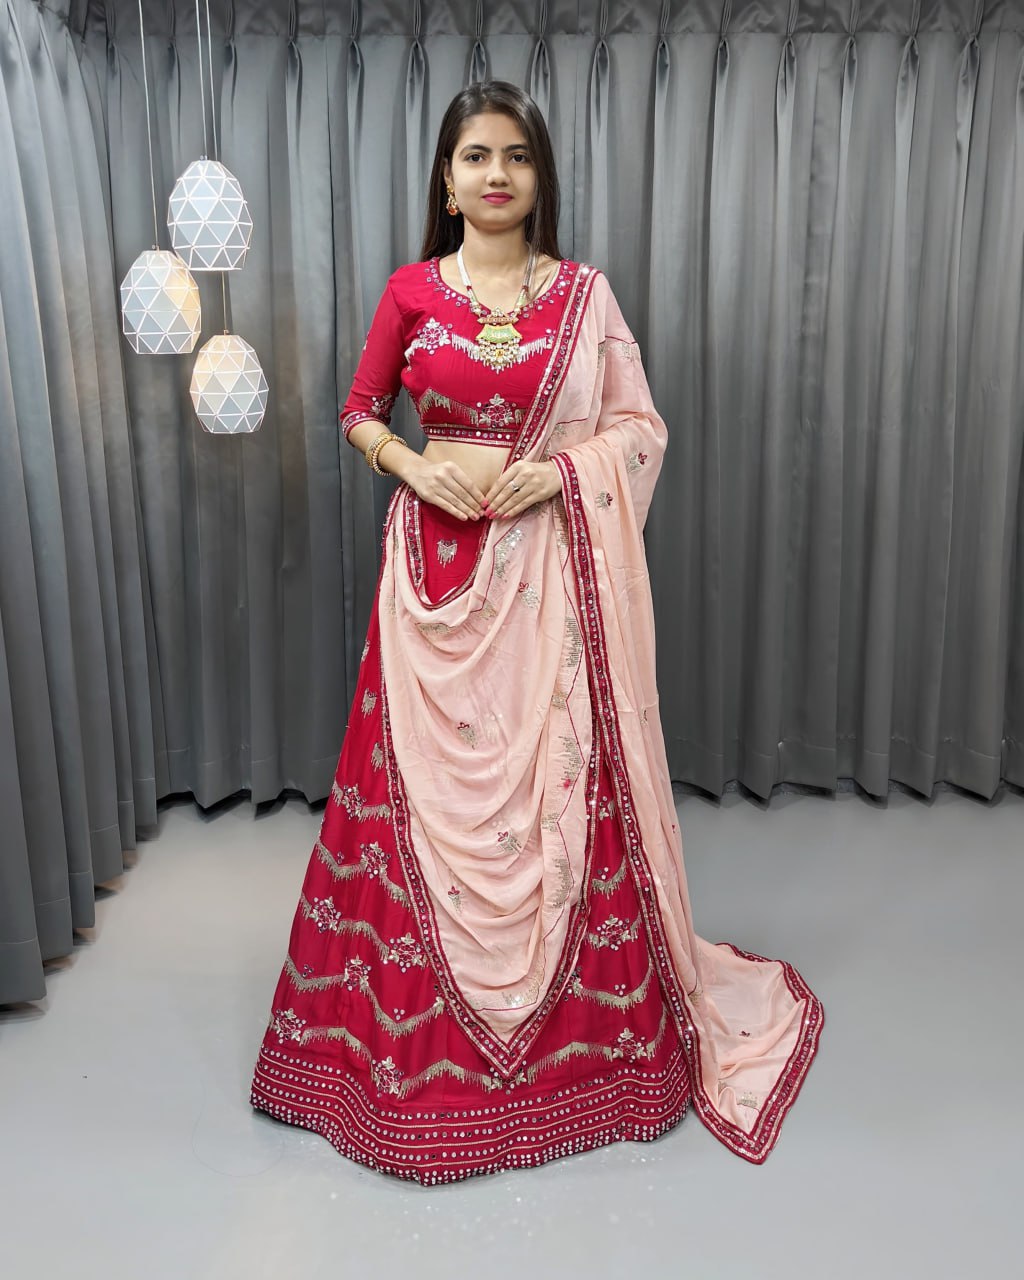 "Regal Rani-Colored Georgette Lehenga Choli Ensemble with Exquisite Mirror Work - Perfect for Timeless Elegance"